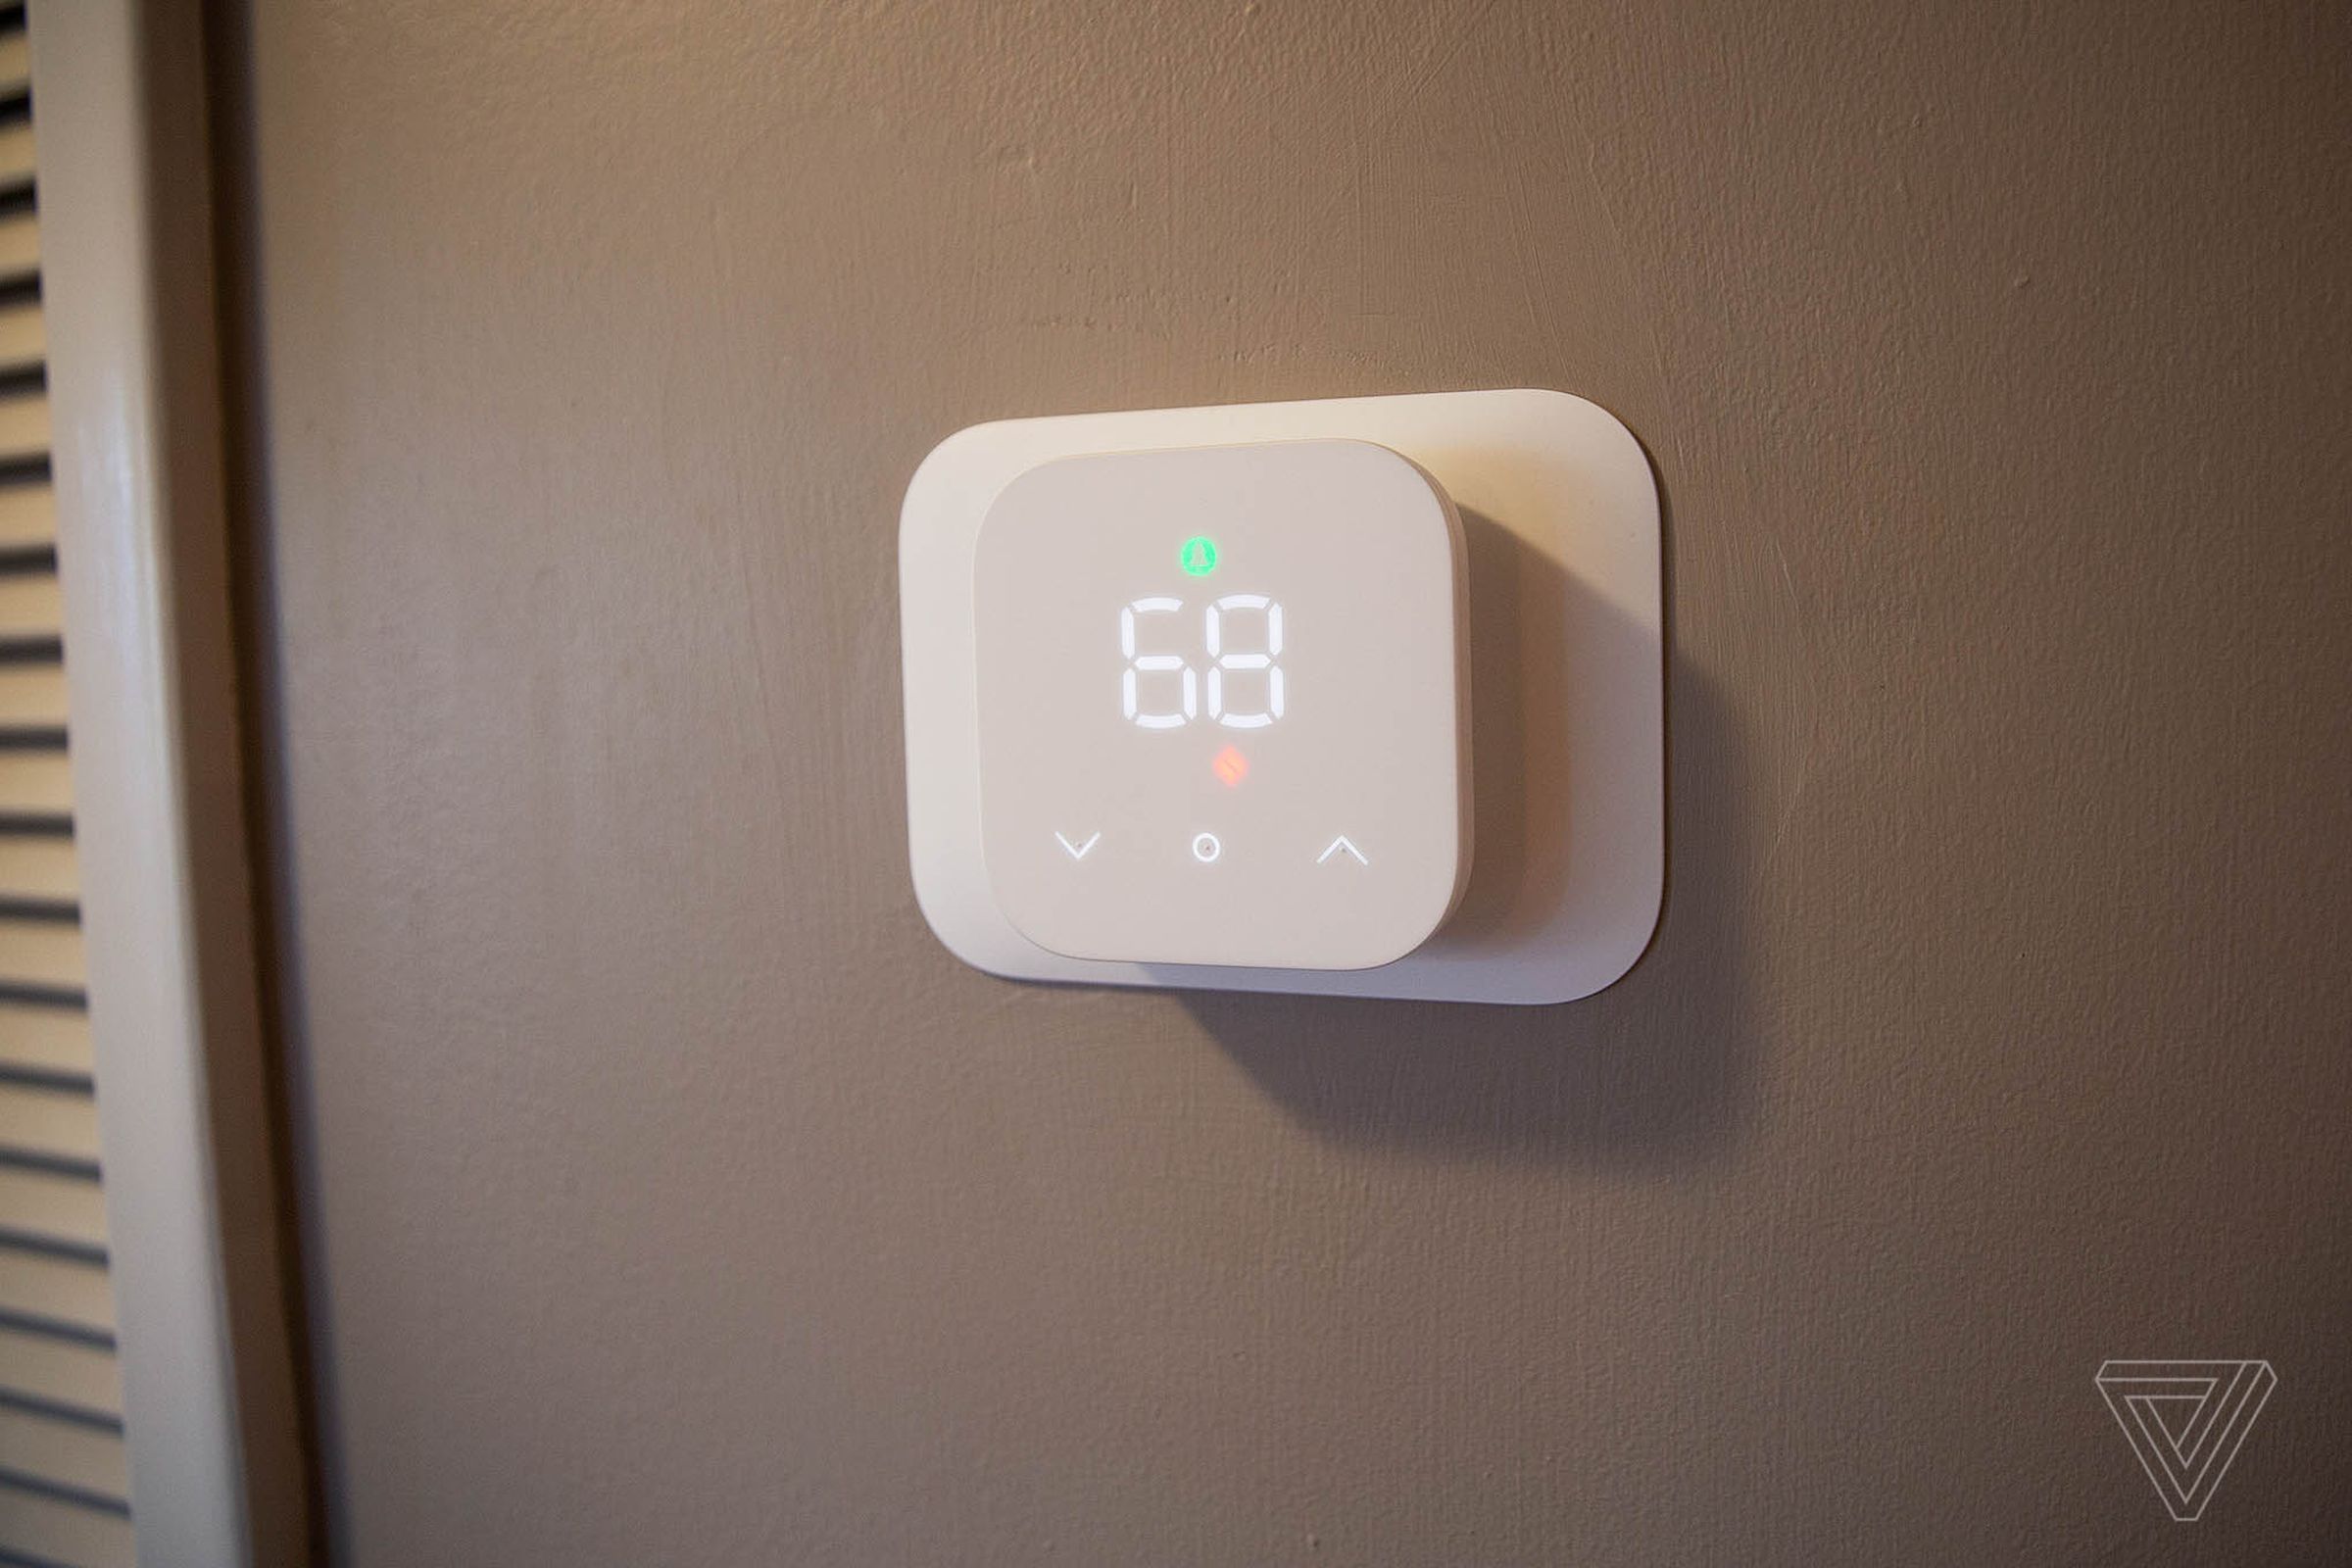 Amazon’s budget-friendly Smart Thermostat packs plenty of smarts for a mere $41.99.